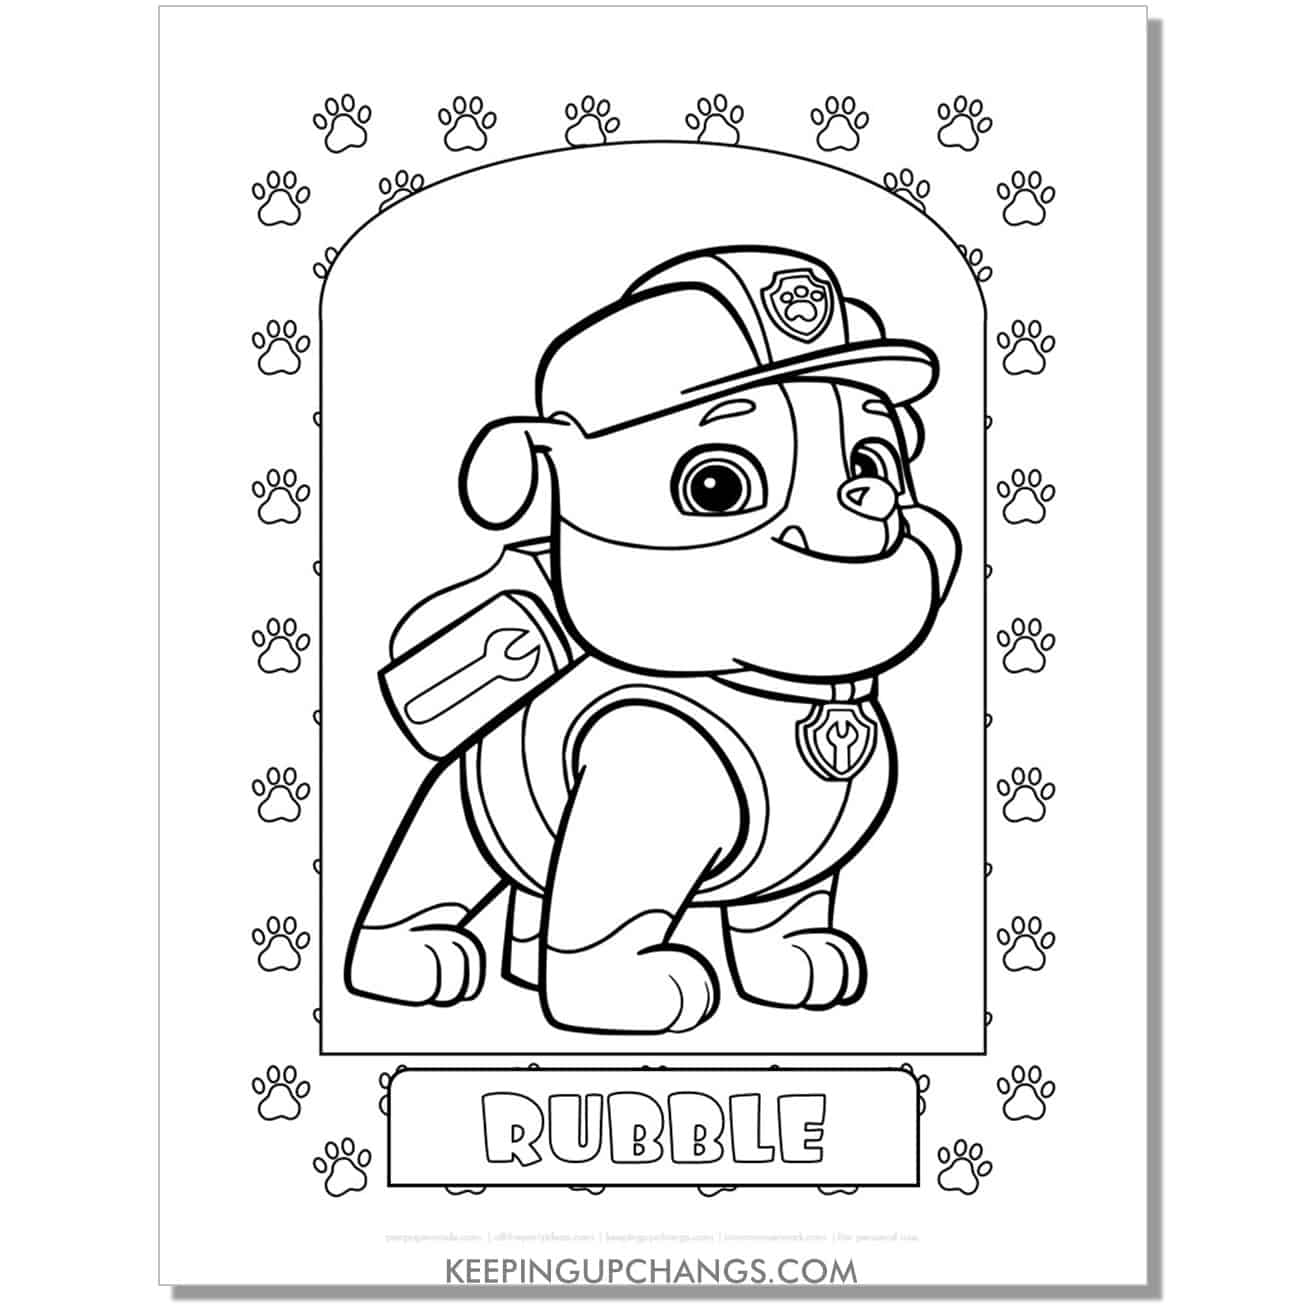 Free paw patrol coloring pages sheets popular printables